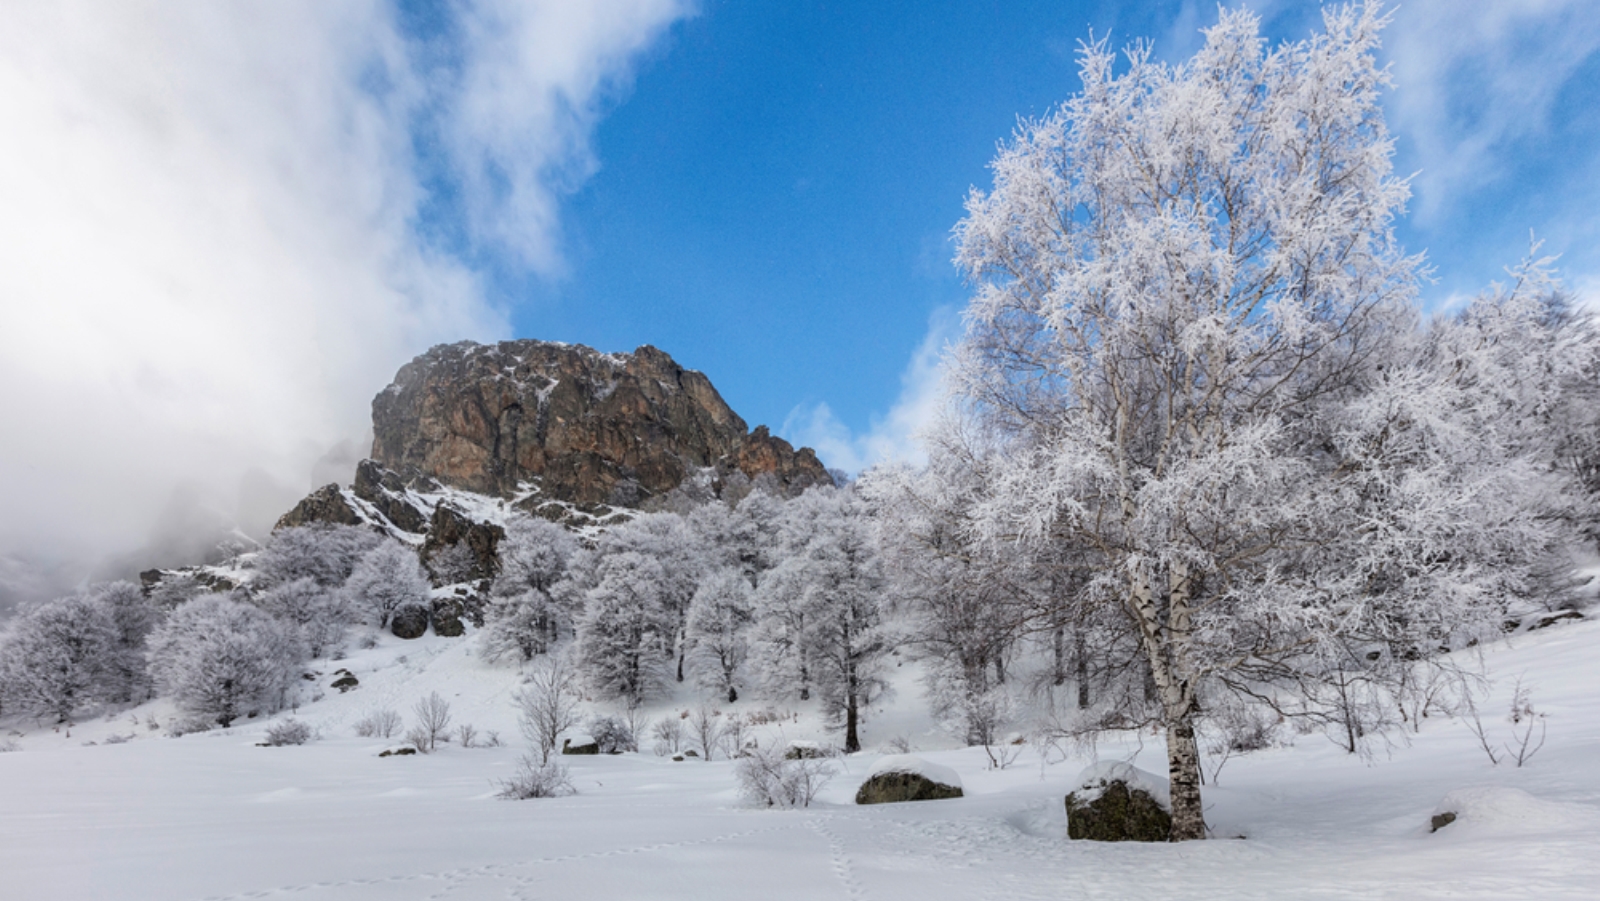 Winter scenery affects our cognitive control. Image by Evgord/Shutterstock.com